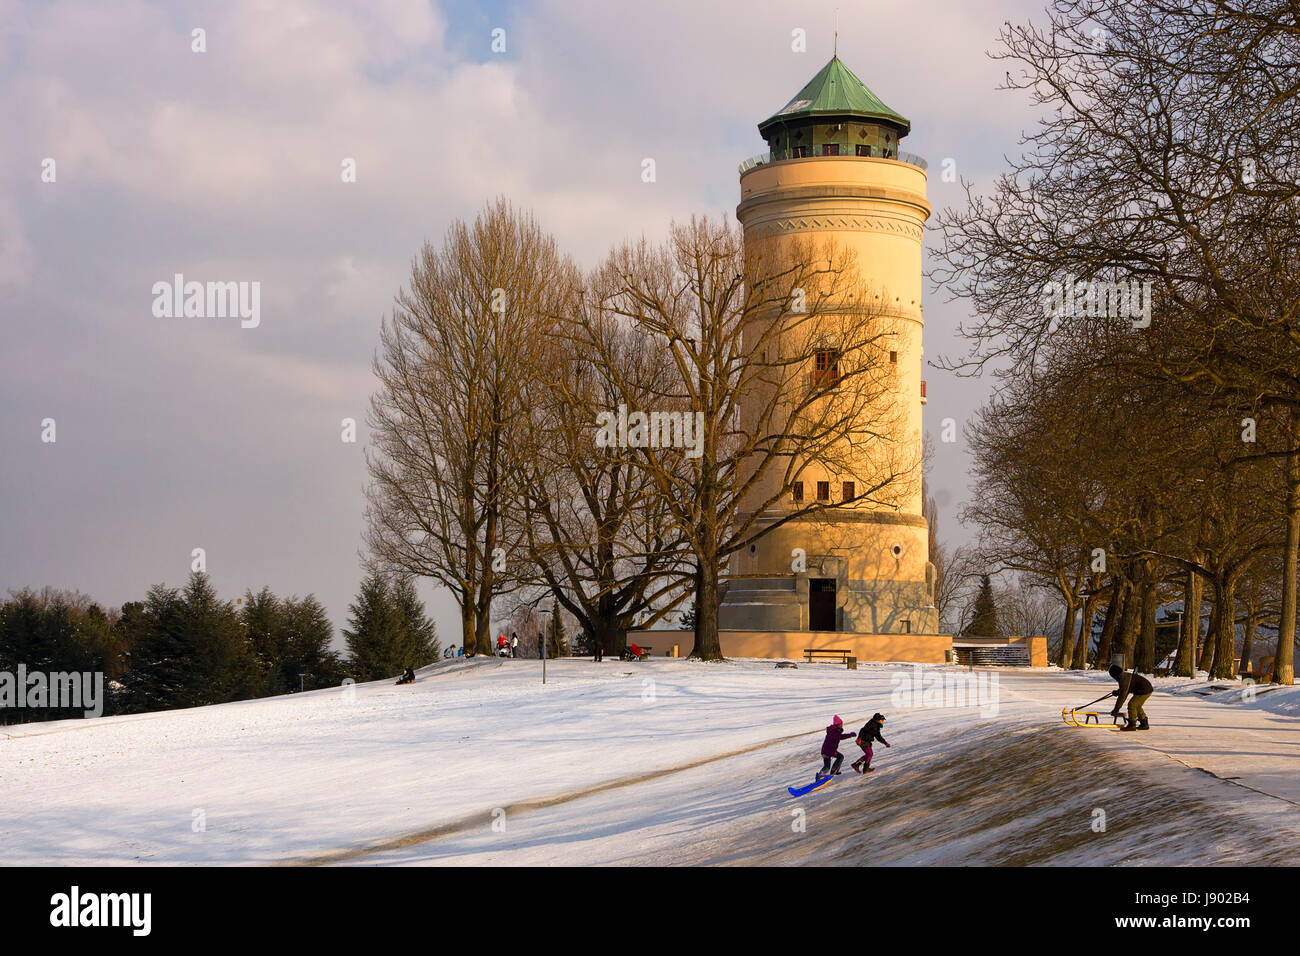 winter pleasures on the water tower Stock Photo